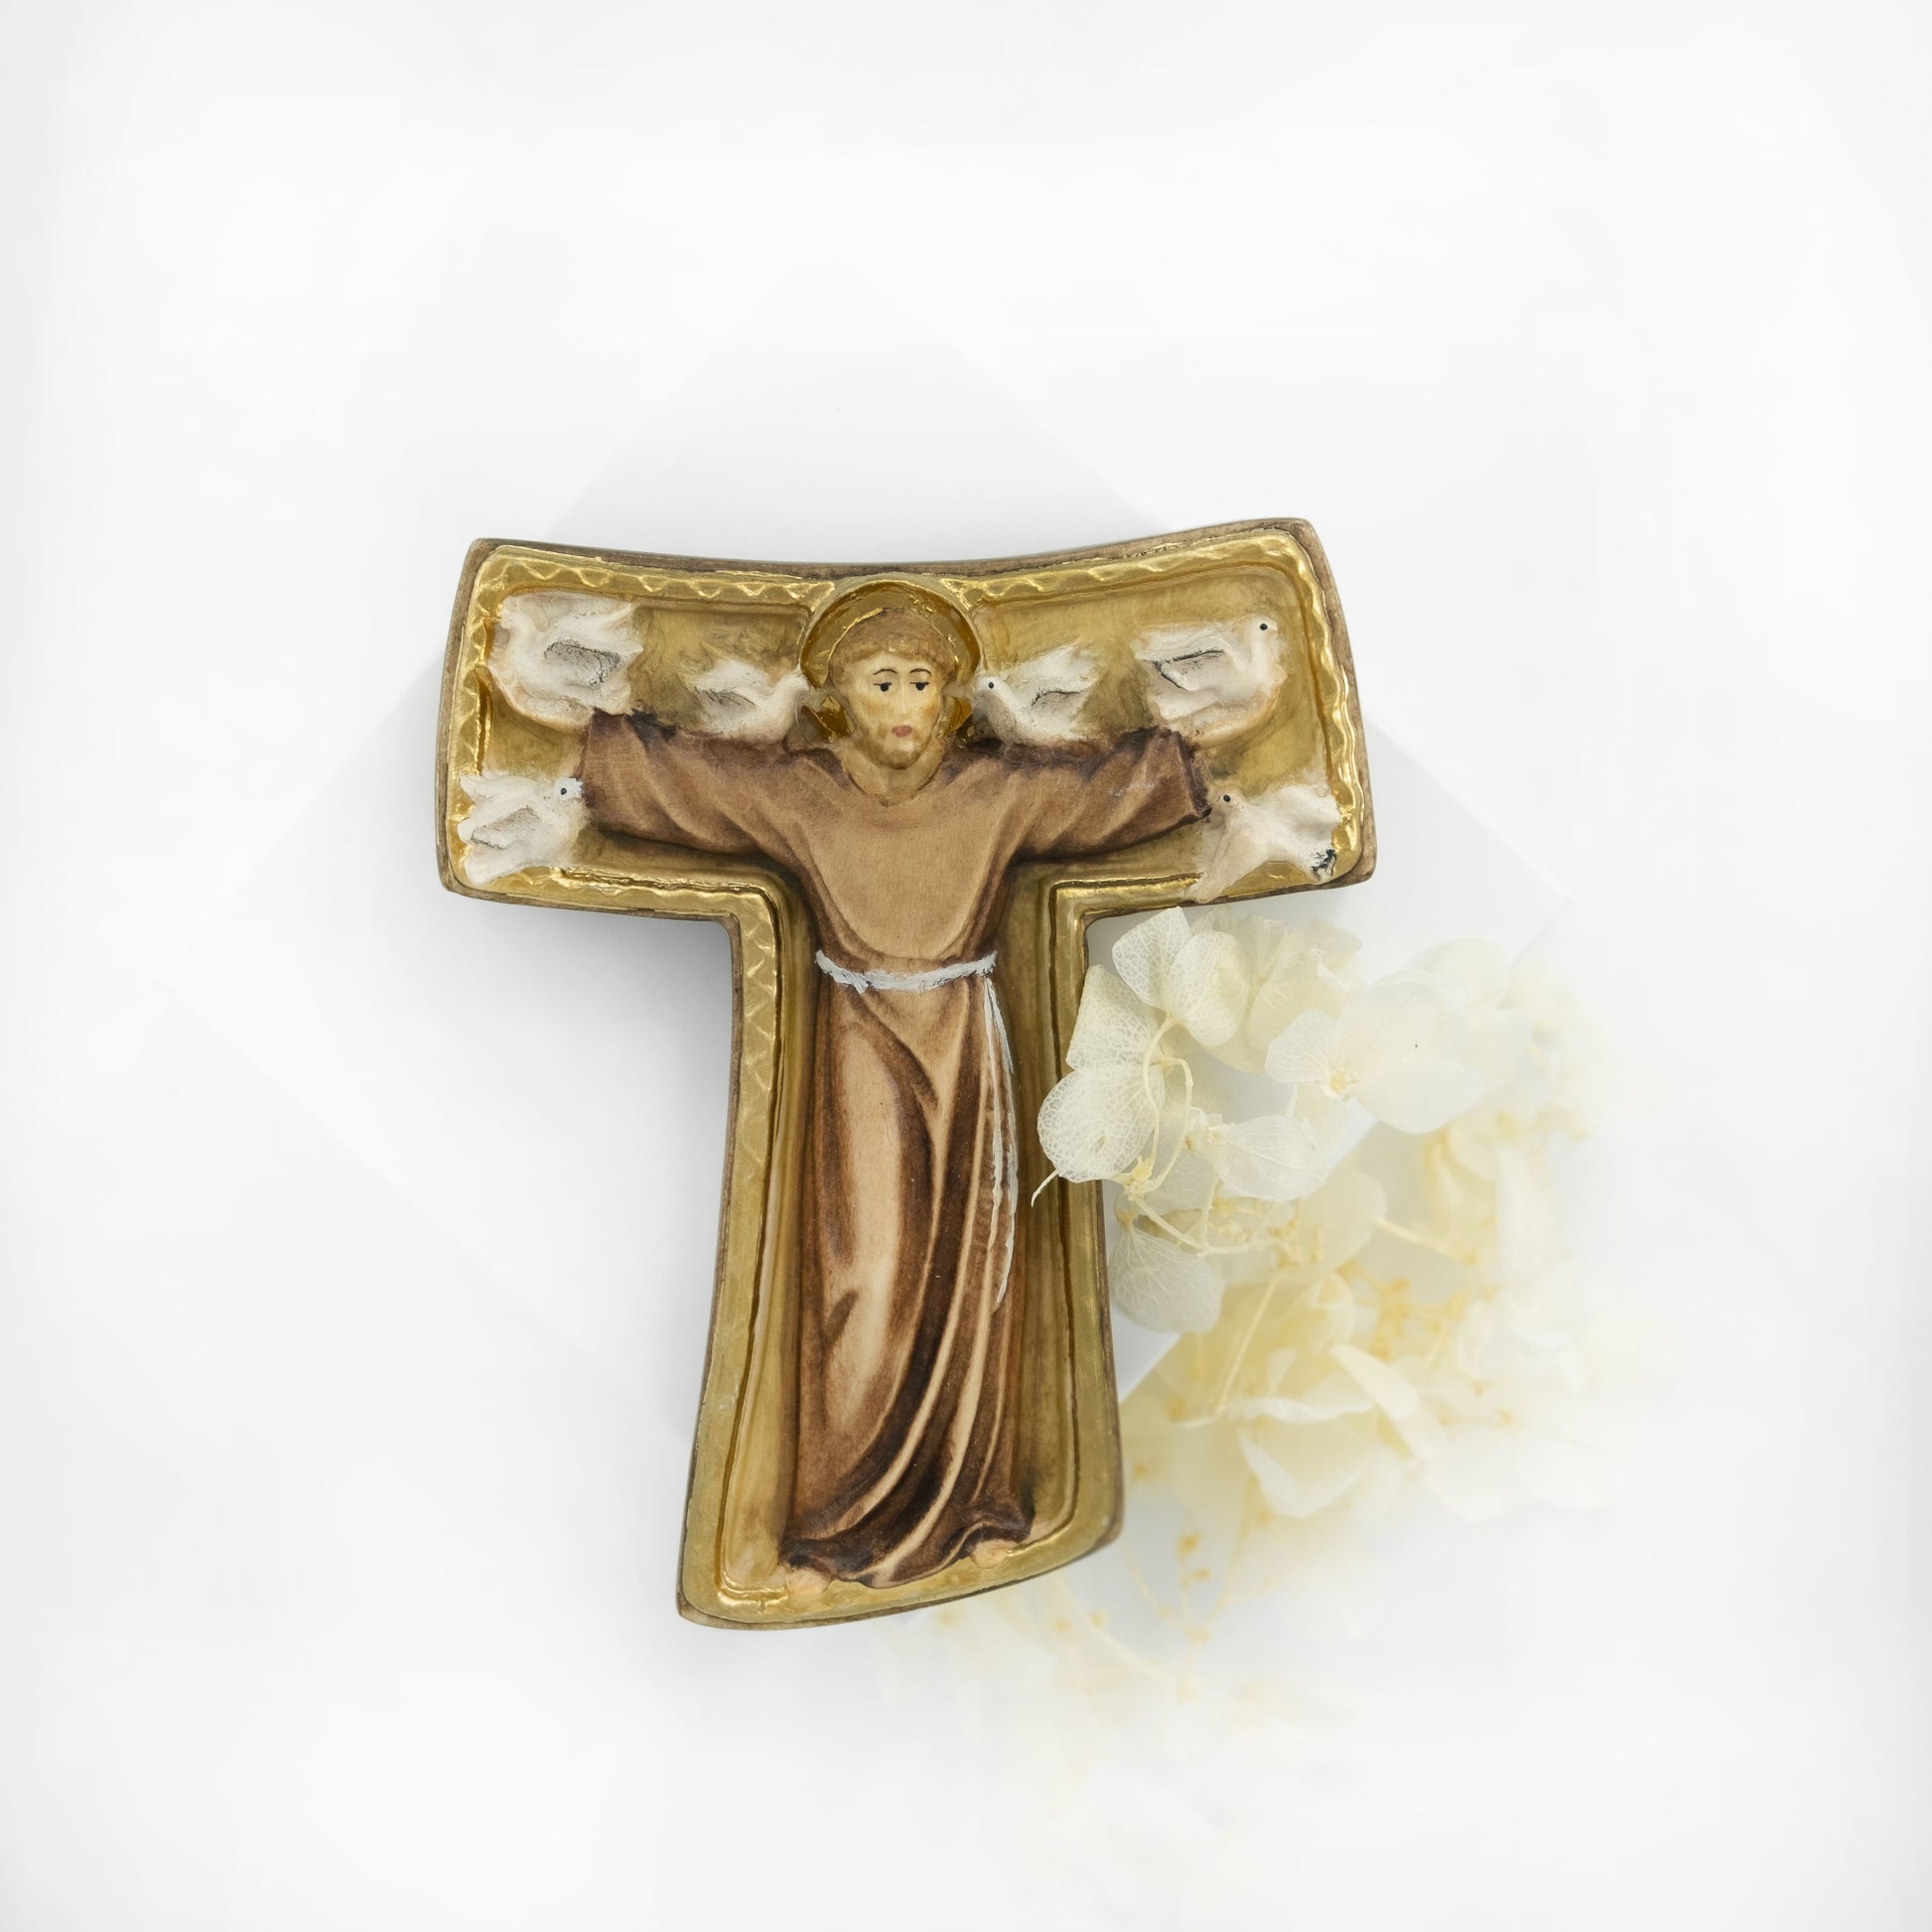 MONDO CATTOLICO 12 cm (4.72 in) Wooden Tau Cross with St. Francis of Assisi